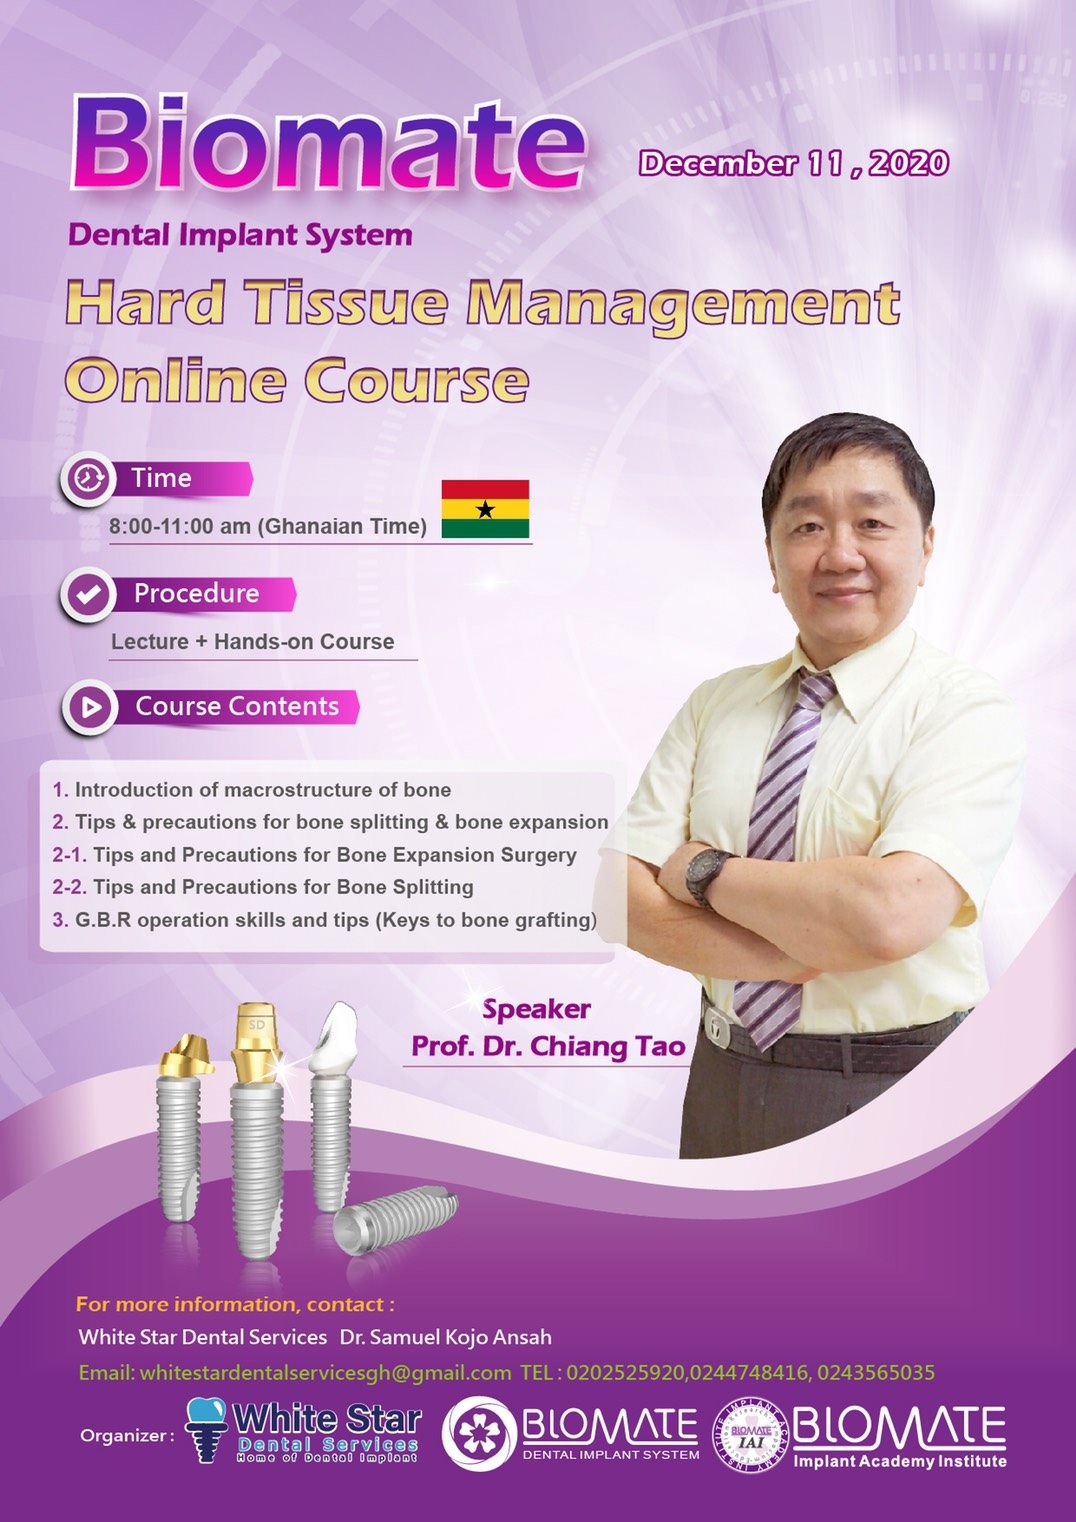 Biomate held the Hard Tissue Management online course on 12/11 for Ghana doctors